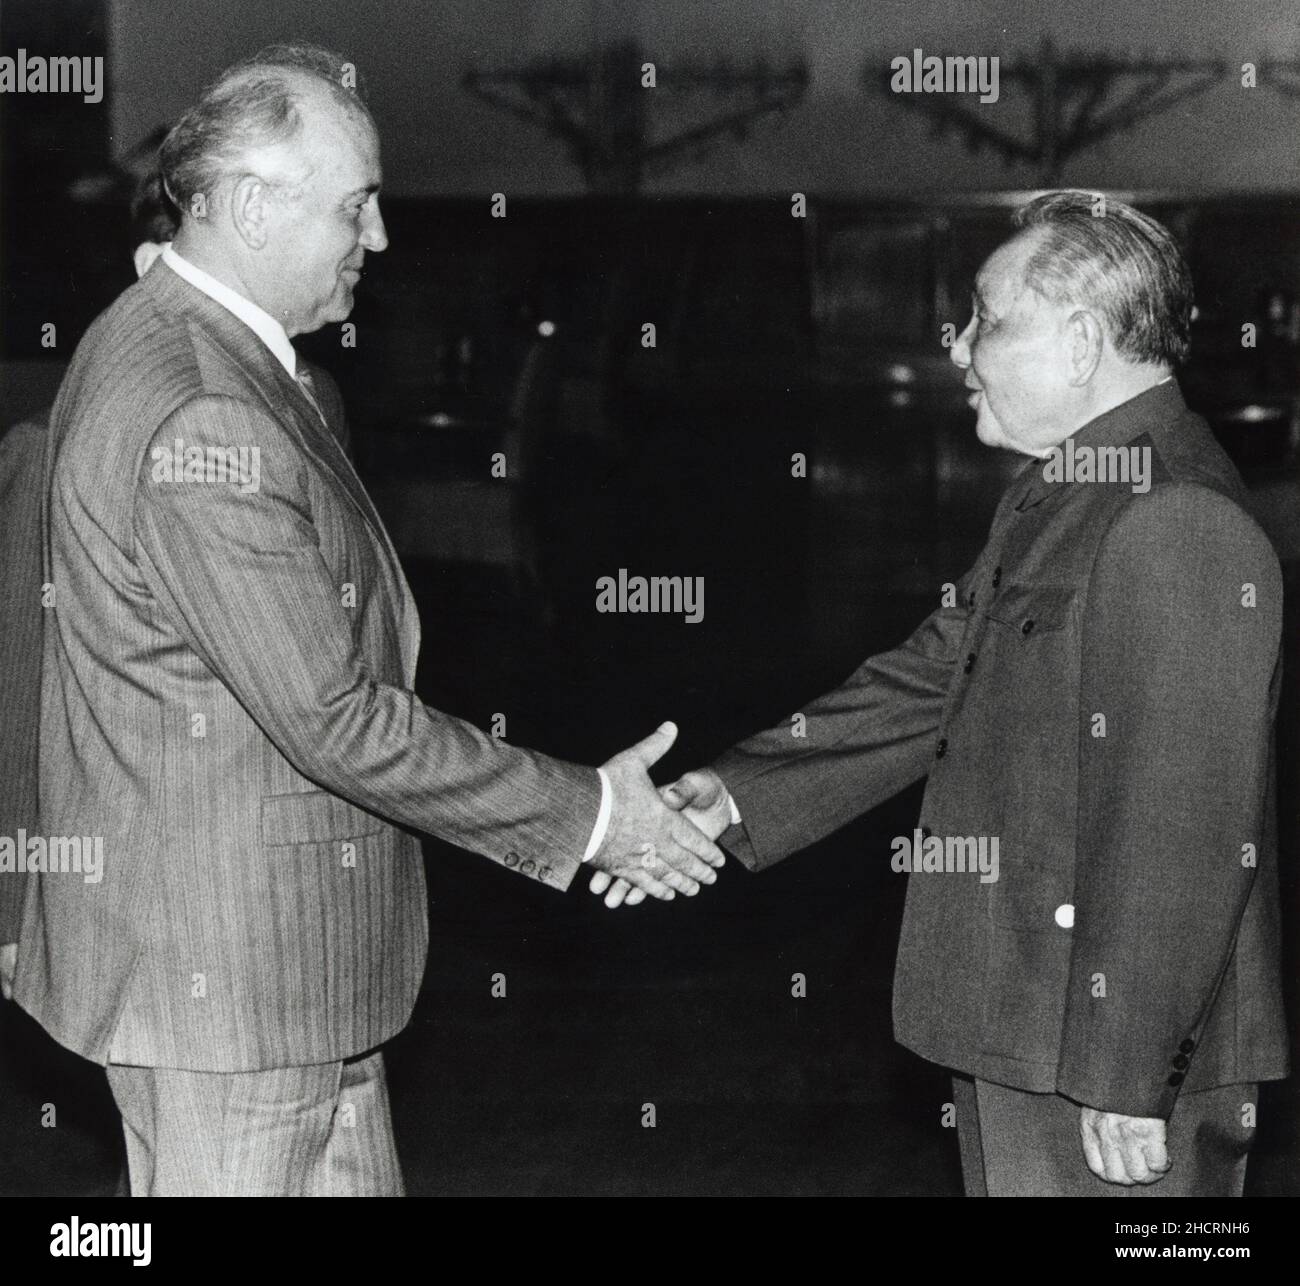 Former Chinese leader Deng Xiaoping greets former leader of the Soviet Union Mikhail Gorbachev in the Great Hall of the People in May 1989. Their meeting is considered the end of the 'Sino-Soviet split.' Stock Photo